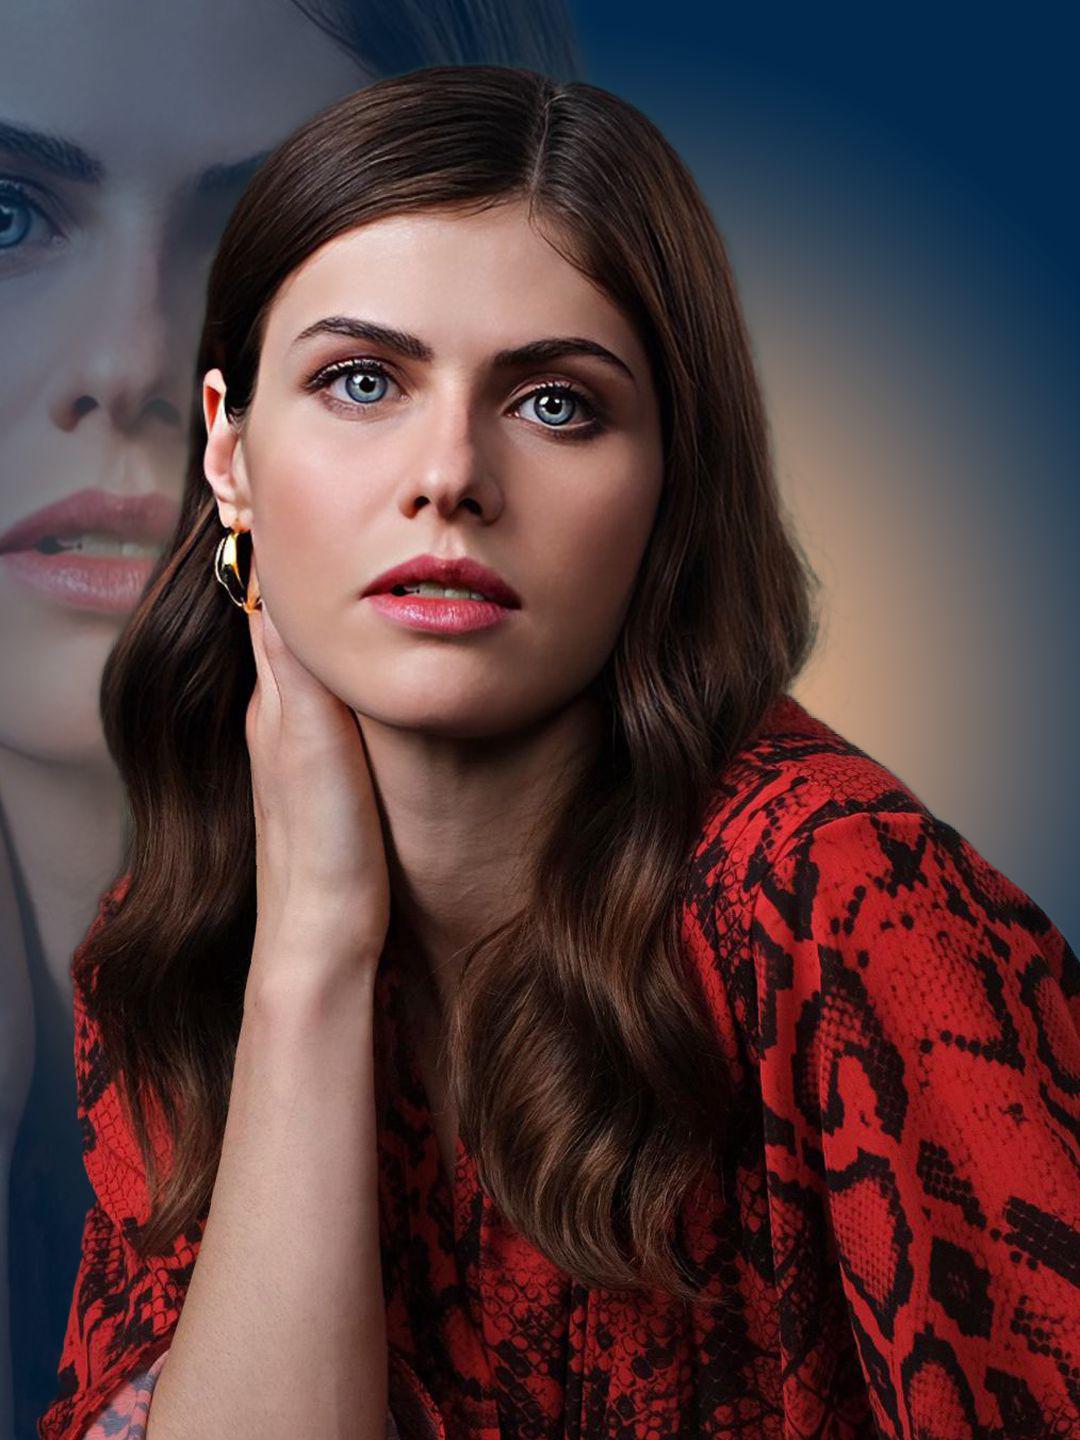 Xxx Sex Video College Professor College Student In Physics - Alexandra Anna Daddario - Celeb ART - Beautiful Artworks of Celebrities,  Footballers, Politicians and Famous People in World | OpenSea